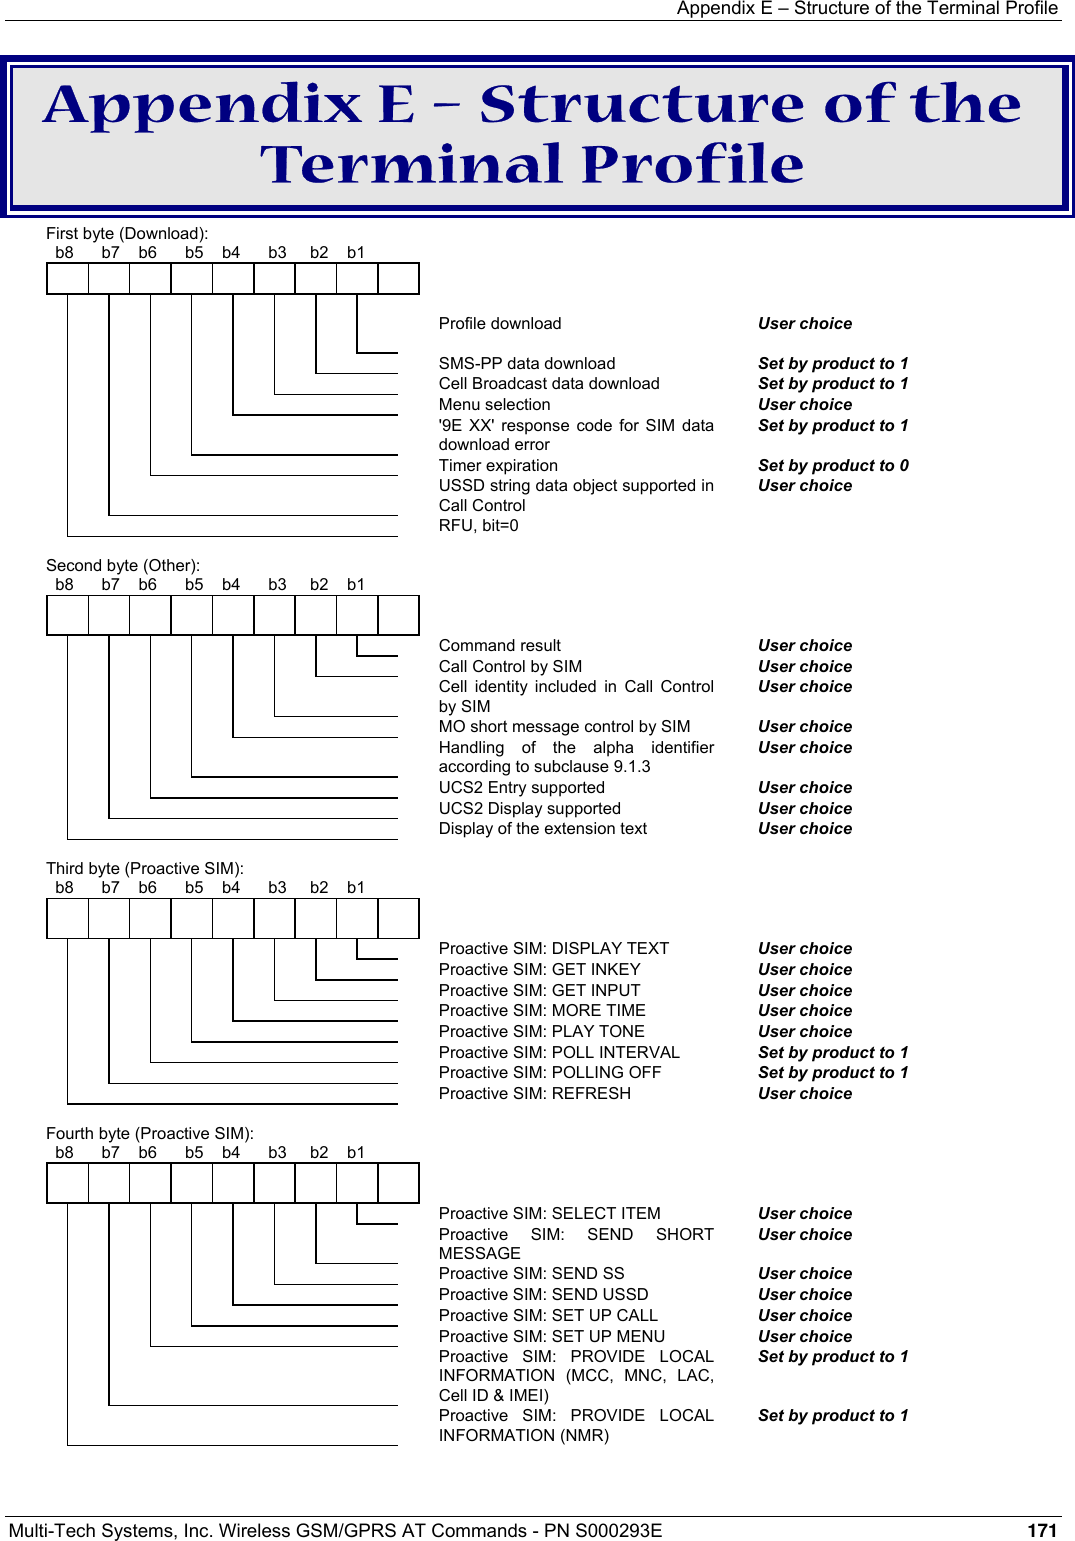 Appendix E – Structure of the Terminal Profile  Multi-Tech Systems, Inc. Wireless GSM/GPRS AT Commands - PN S000293E 171  Appendix E – Structure of the Terminal Profile First byte (Download):   b8      b7    b6      b5    b4      b3     b2    b1                                 Profile download  User choice           SMS-PP data download  Set by product to 1           Cell Broadcast data download  Set by product to 1           Menu selection  User choice           &apos;9E XX&apos; response code for SIM data download error Set by product to 1           Timer expiration  Set by product to 0           USSD string data object supported in Call Control User choice           RFU, bit=0    Second byte (Other):   b8      b7    b6      b5    b4      b3     b2    b1  4          Command result  User choice           Call Control by SIM  User choice           Cell identity included in Call Control by SIM User choice           MO short message control by SIM    User choice           Handling of the alpha identifier according to subclause 9.1.3 User choice           UCS2 Entry supported  User choice           UCS2 Display supported  User choice           Display of the extension text  User choice  Third byte (Proactive SIM):   b8      b7    b6      b5    b4      b3     b2    b1  4          Proactive SIM: DISPLAY TEXT  User choice           Proactive SIM: GET INKEY  User choice           Proactive SIM: GET INPUT  User choice           Proactive SIM: MORE TIME  User choice           Proactive SIM: PLAY TONE  User choice           Proactive SIM: POLL INTERVAL  Set by product to 1           Proactive SIM: POLLING OFF  Set by product to 1           Proactive SIM: REFRESH  User choice  Fourth byte (Proactive SIM):   b8      b7    b6      b5    b4      b3     b2    b1  4          Proactive SIM: SELECT ITEM   User choice           Proactive SIM: SEND SHORT MESSAGE  User choice           Proactive SIM: SEND SS   User choice           Proactive SIM: SEND USSD  User choice           Proactive SIM: SET UP CALL  User choice           Proactive SIM: SET UP MENU  User choice           Proactive SIM: PROVIDE LOCAL INFORMATION (MCC, MNC, LAC, Cell ID &amp; IMEI) Set by product to 1           Proactive SIM: PROVIDE LOCAL INFORMATION (NMR) Set by product to 1 